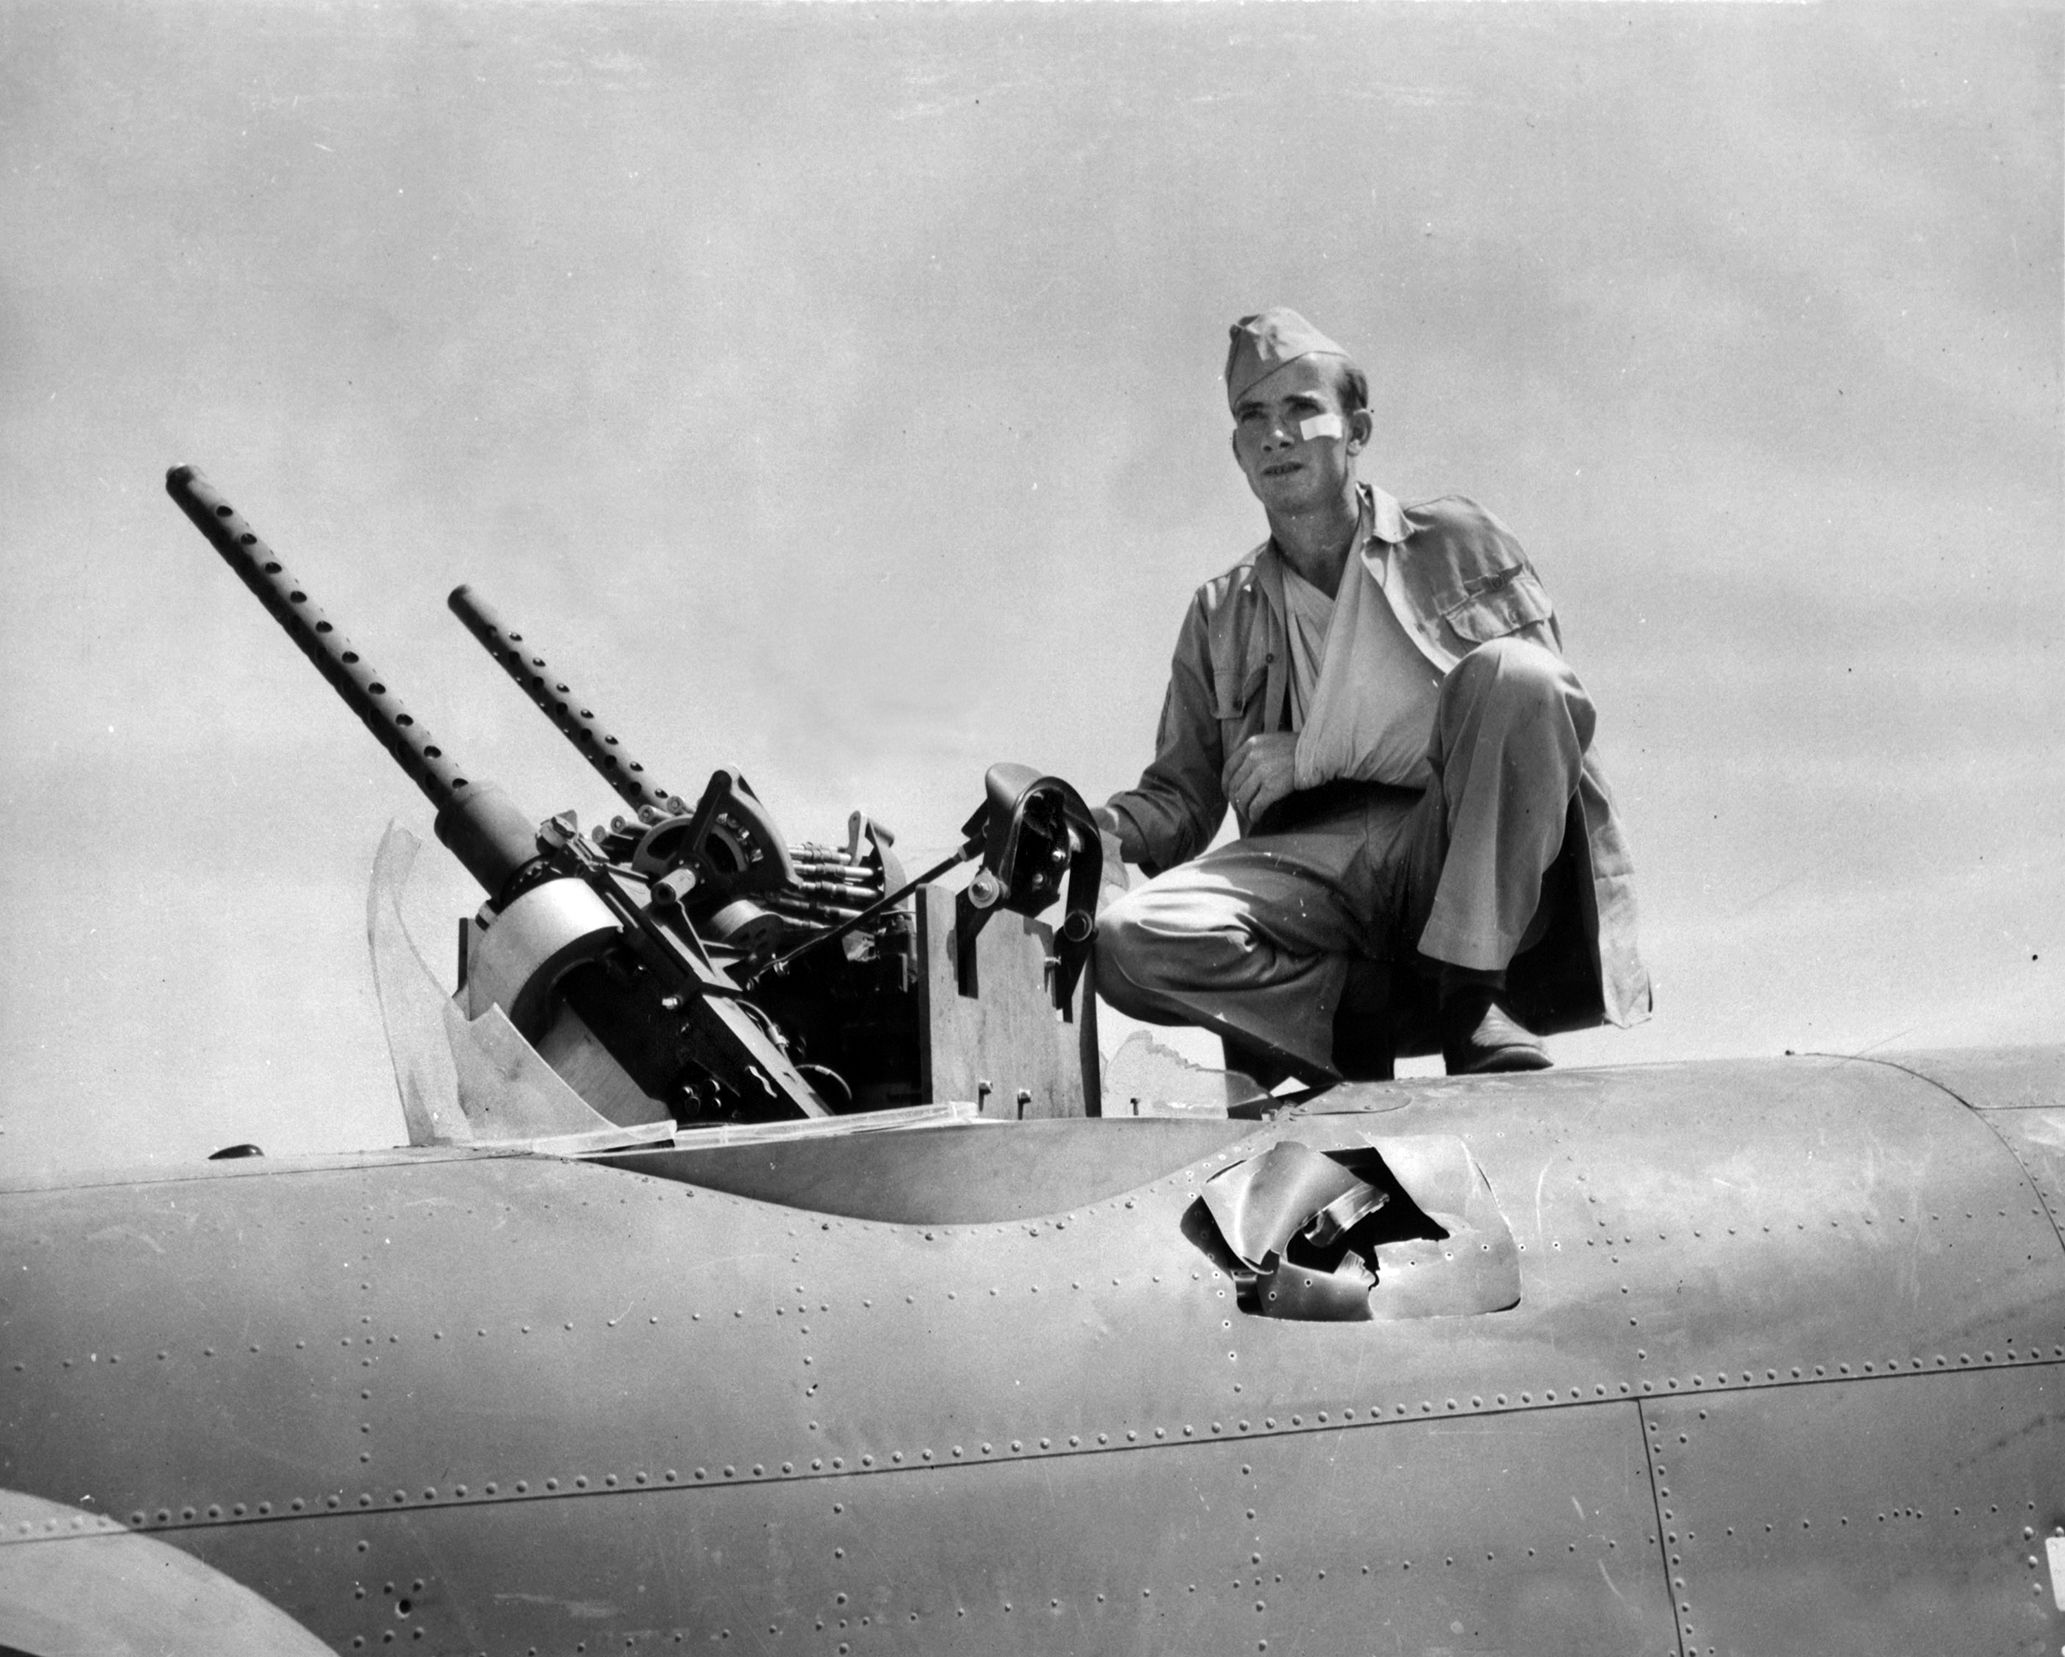 Staff Sergeant Billy Dykes sits near the upper turret of his B-25 bomber at Gerbini airfield, Sicily. German flak damaged the aircraft near his position, and he received minor injuries. Note the point of impact just below his location.